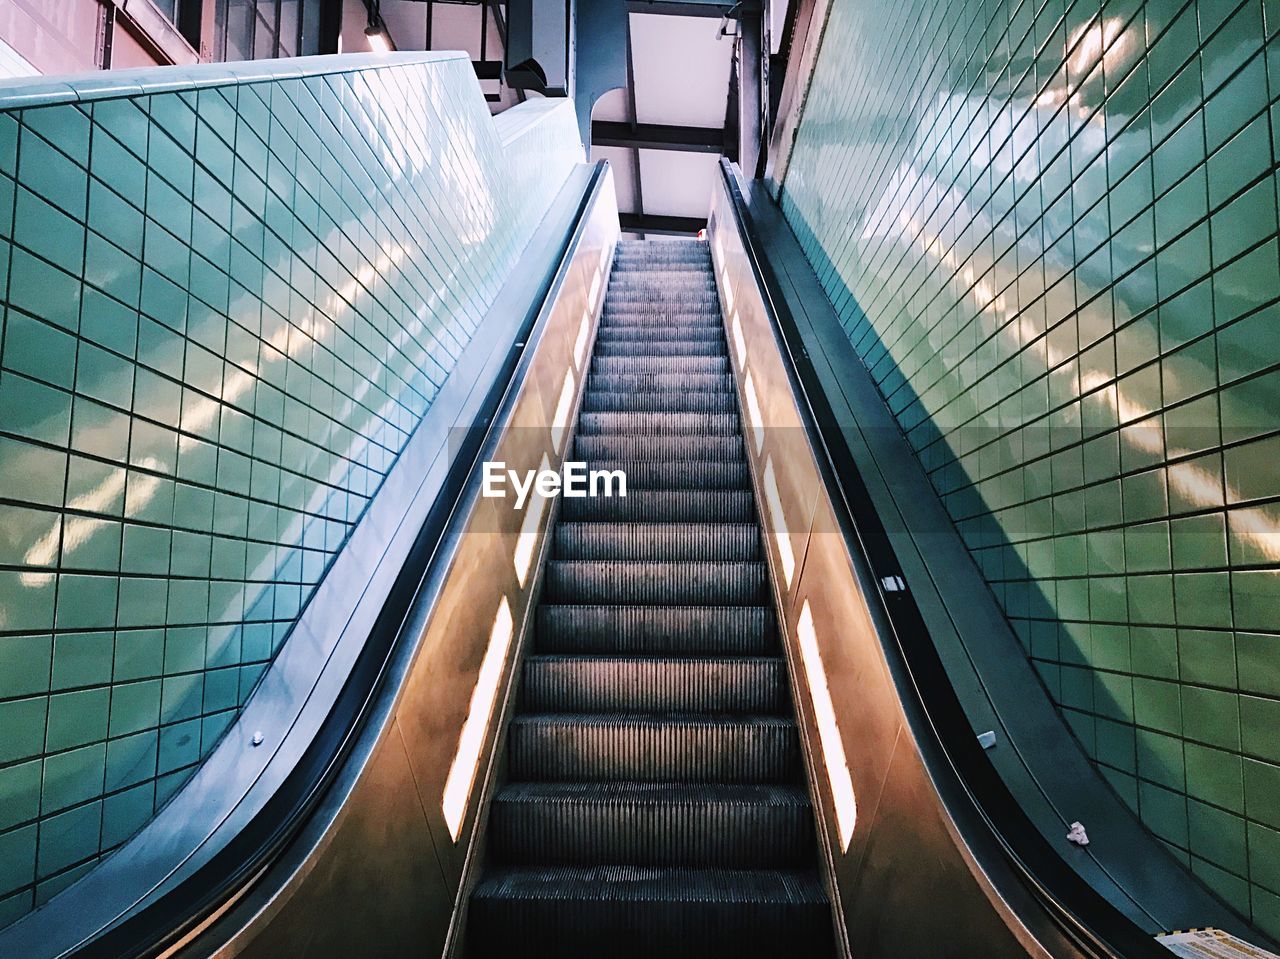 LOW ANGLE VIEW OF ESCALATOR IN SUBWAY